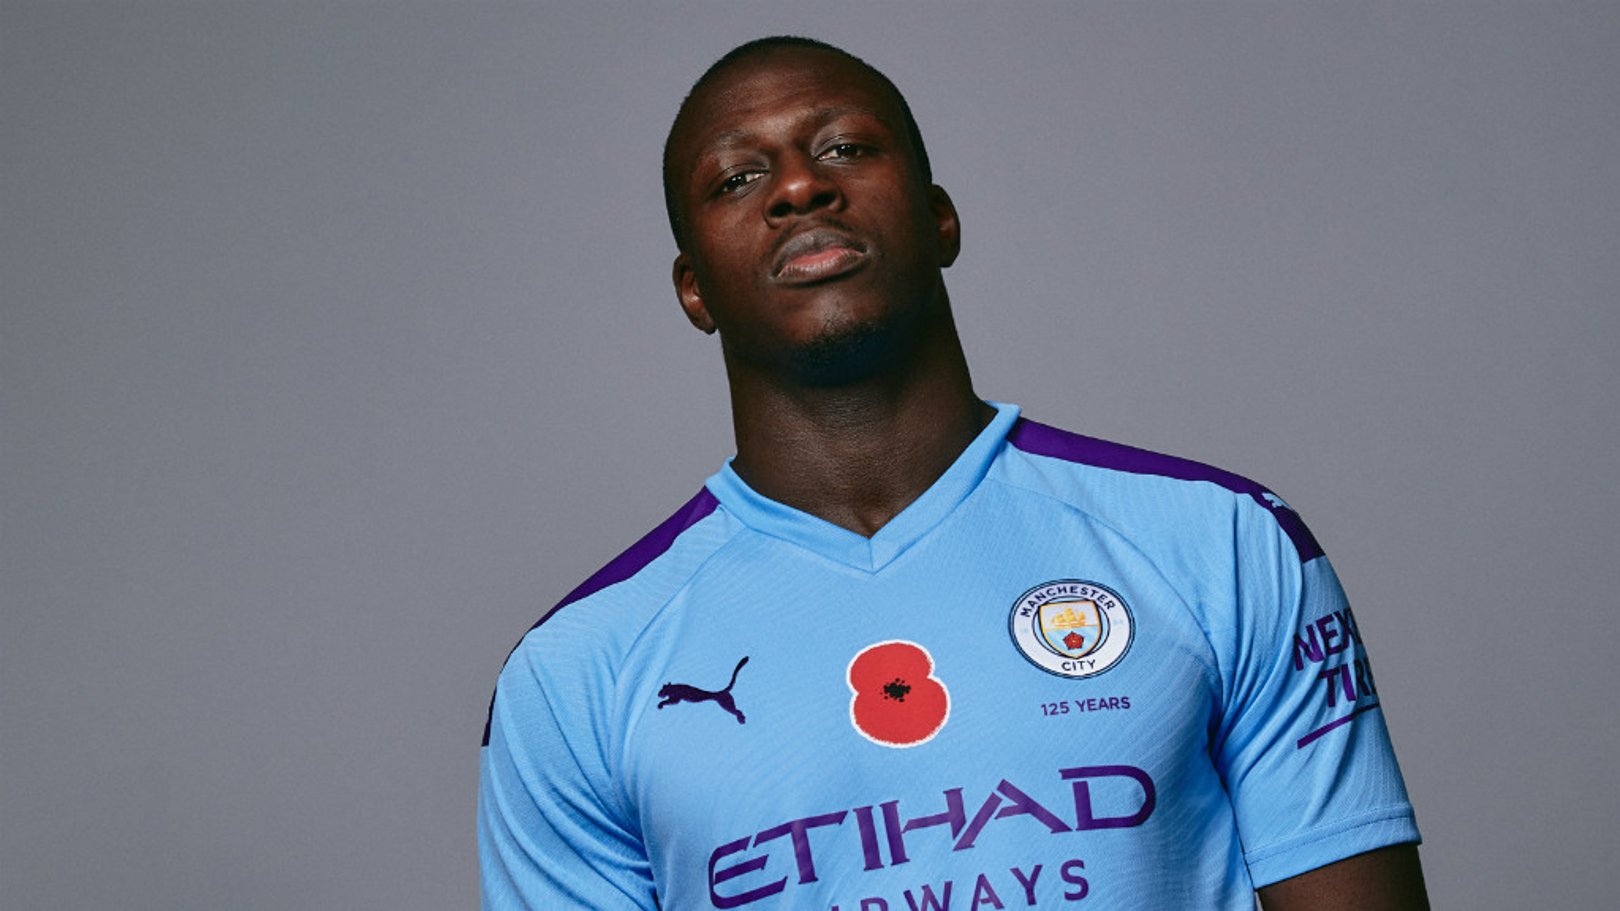 NEVER FORGOTTEN: Find out how you can get the poppy printed on your City shirt